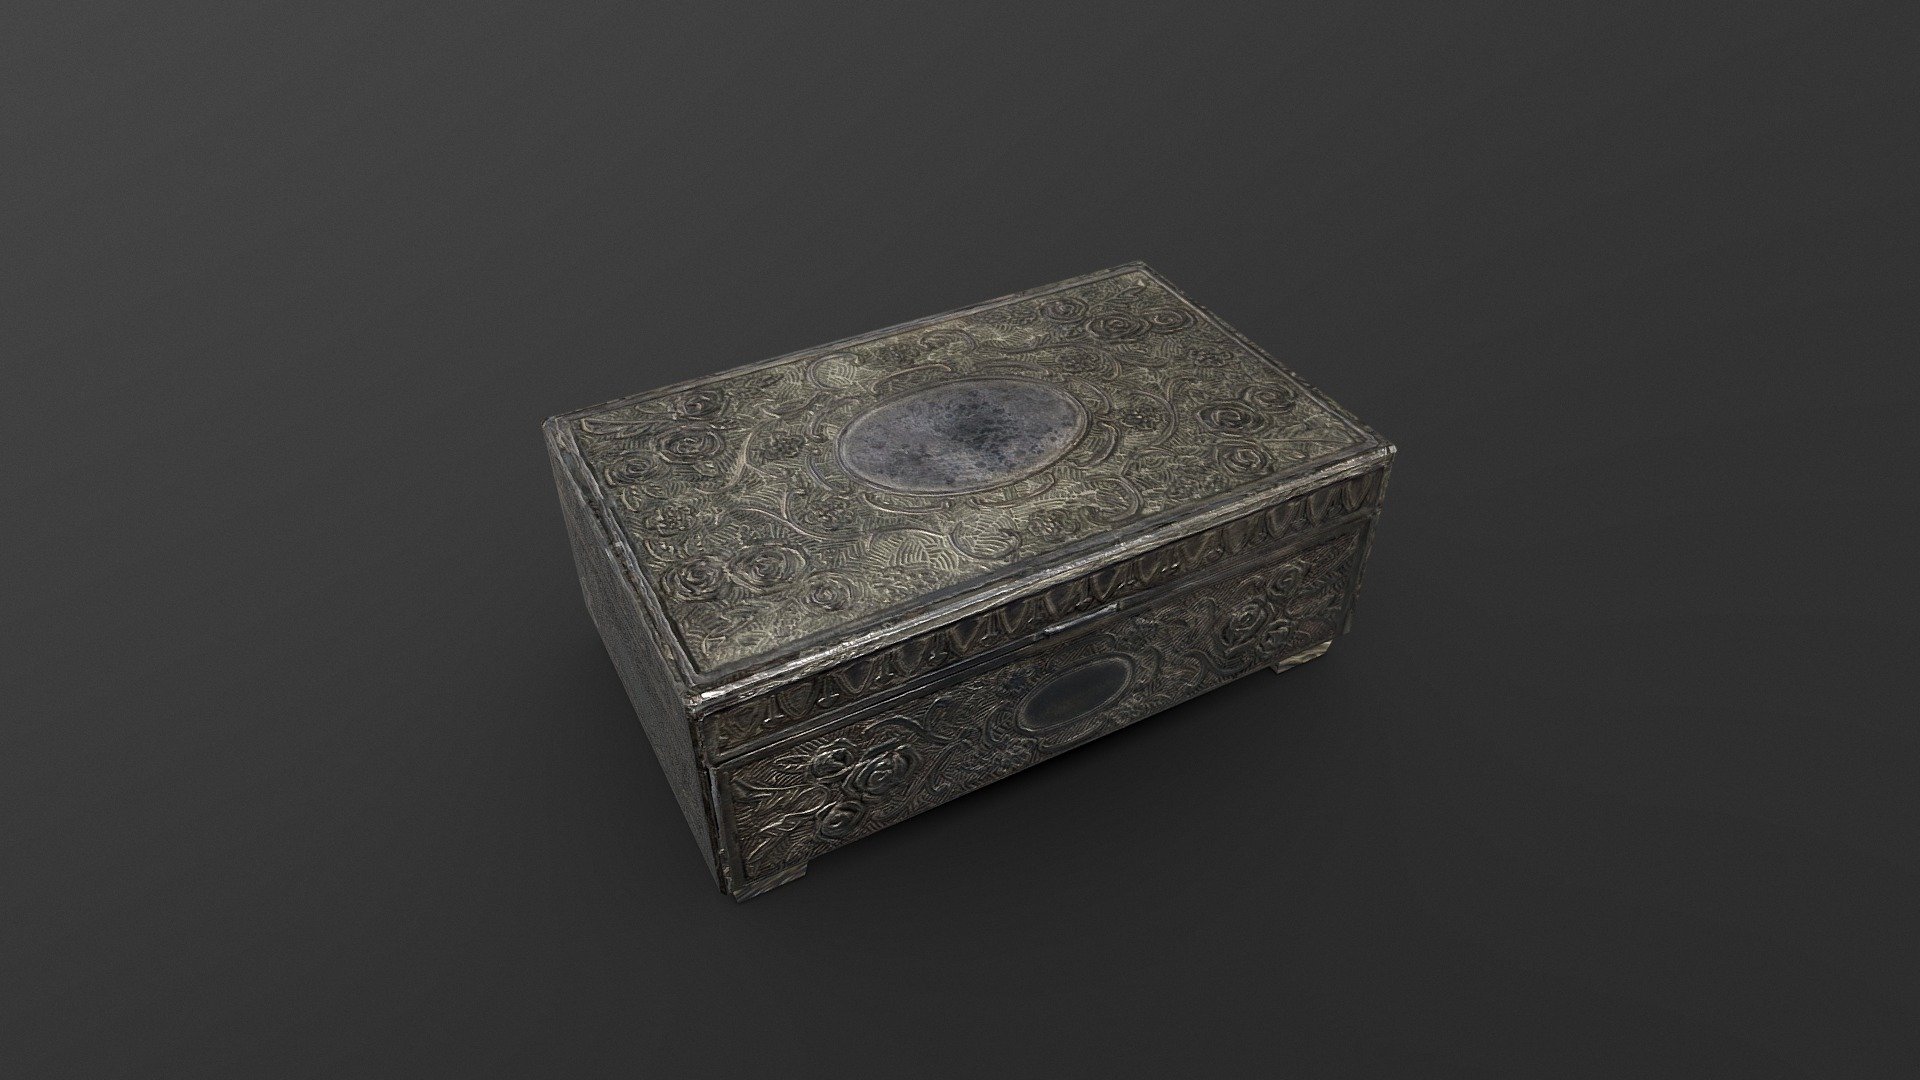 Metal Rose Jewelry or Trinket Box Low Poly

I used a rough photogrammetry scan and baked it's textures on to a low-poly object. Some parts of it came out a little rough and despite some patchwork I still feel like it's good enough to put a price on it so it's free. However, if you wish to support my work feel free to purchase one of my other models thank you! - Metal Rose Jewelry Trinket Box Low Poly - Download Free 3D model by Jordan F (@JordanF) 3d model